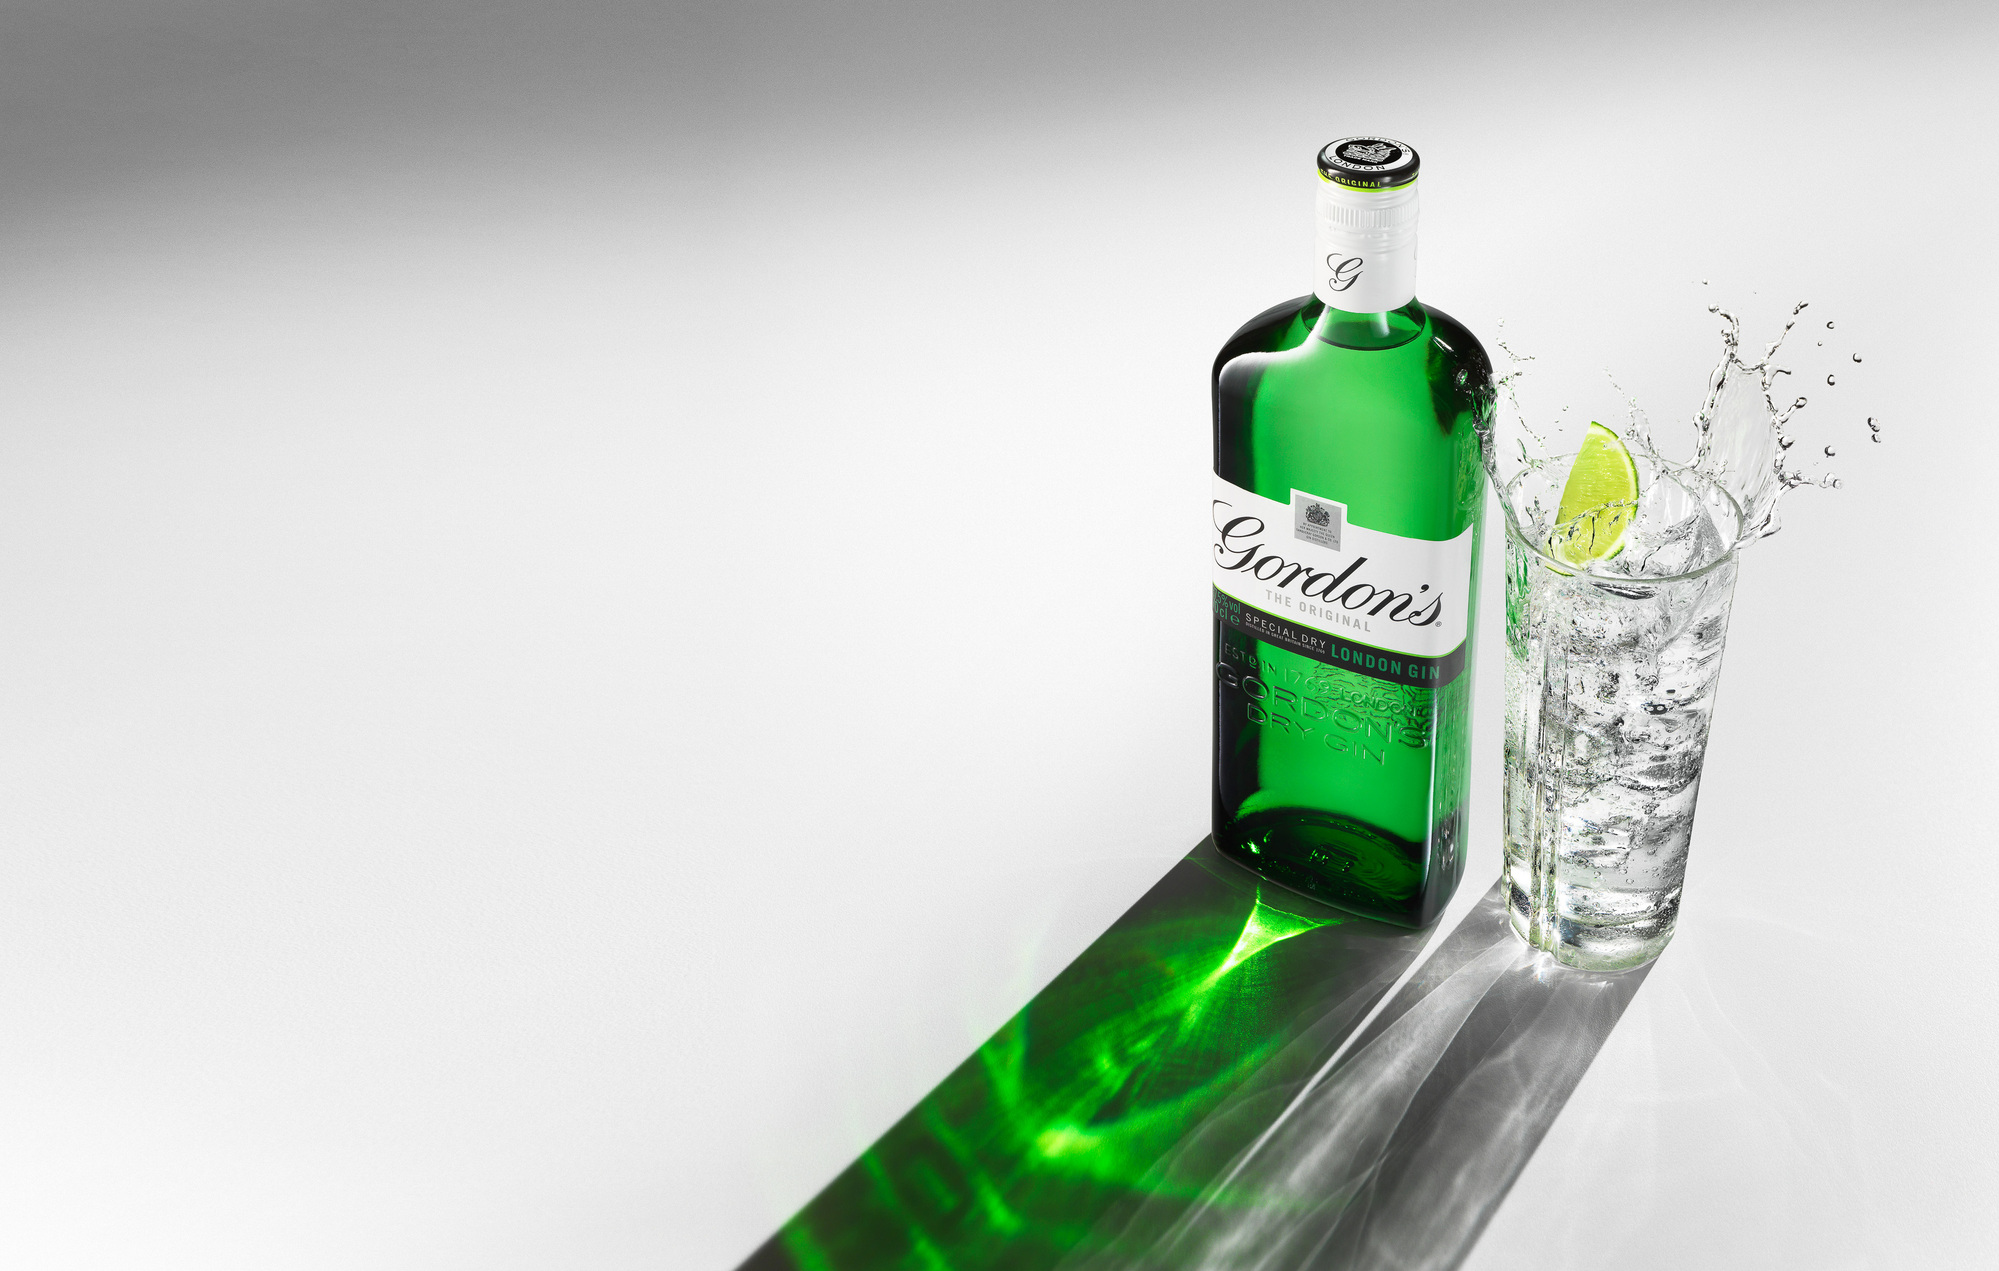 Gordon's gin bottle and splash photography. Beverages and alcohol product & advertising photography by Timothy Hogan Studio in Los Angeles